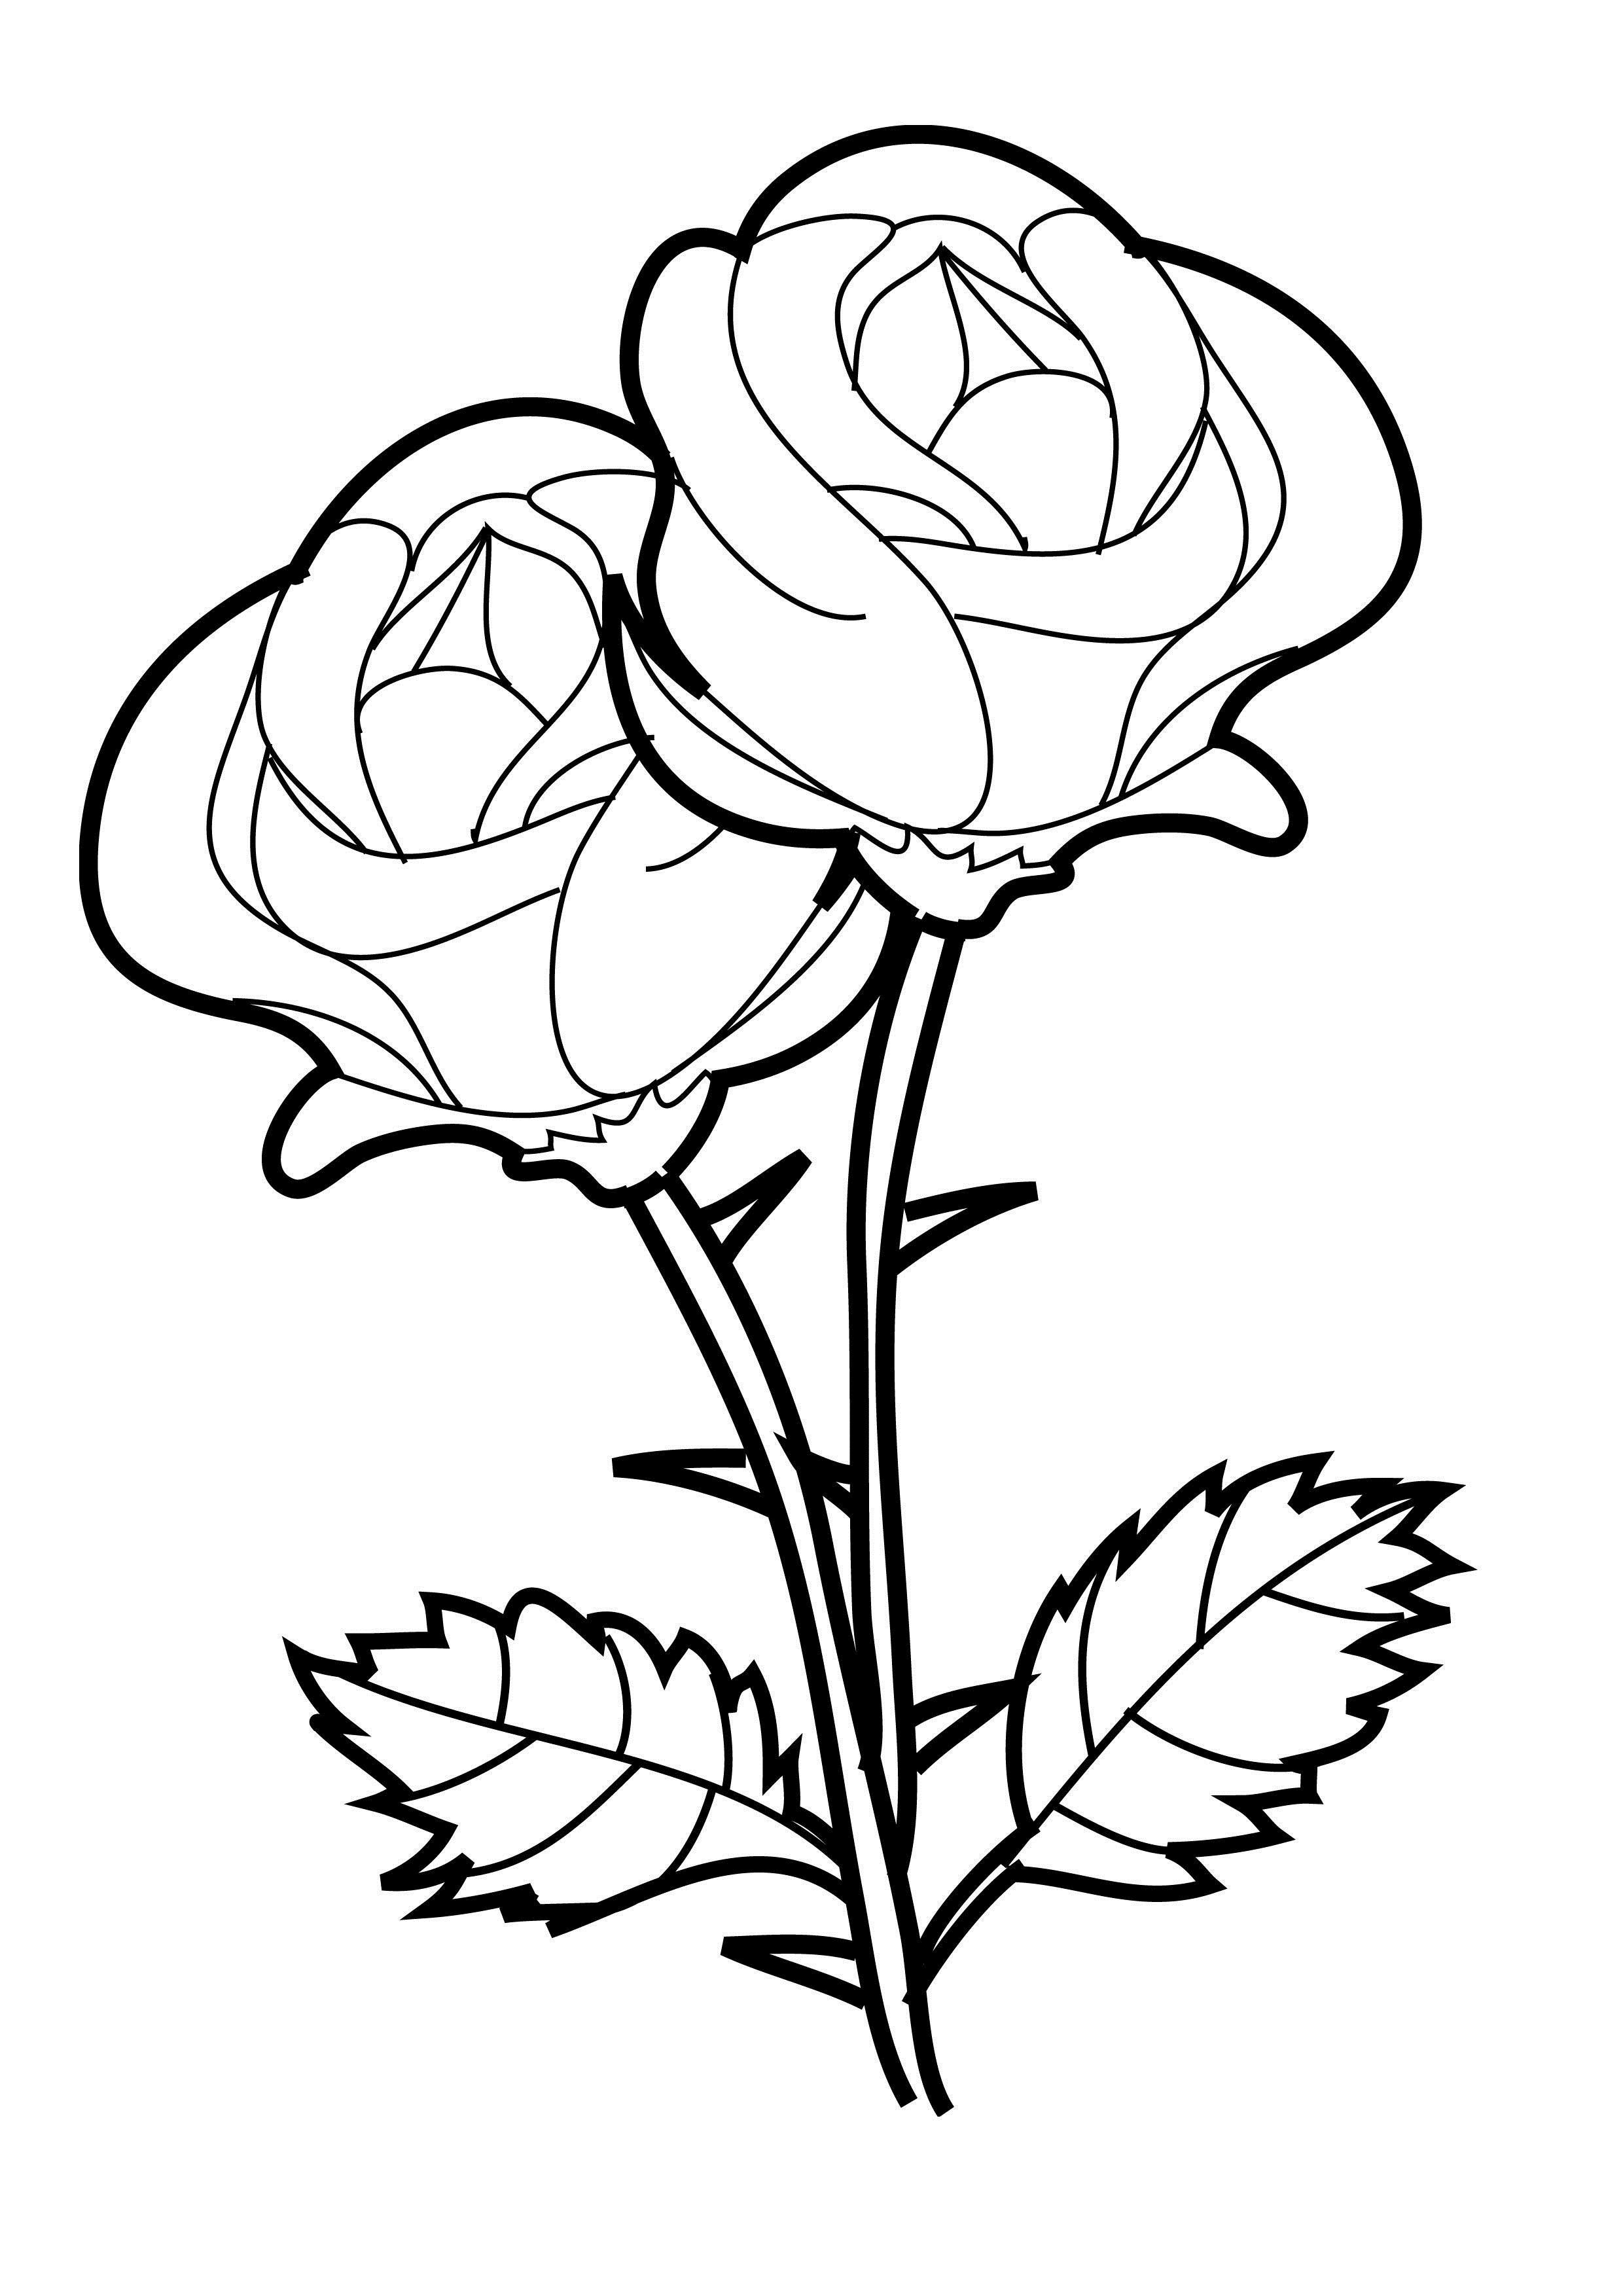 Flower coloring pages printable flower coloring pages heart coloring pages rose coloring pages